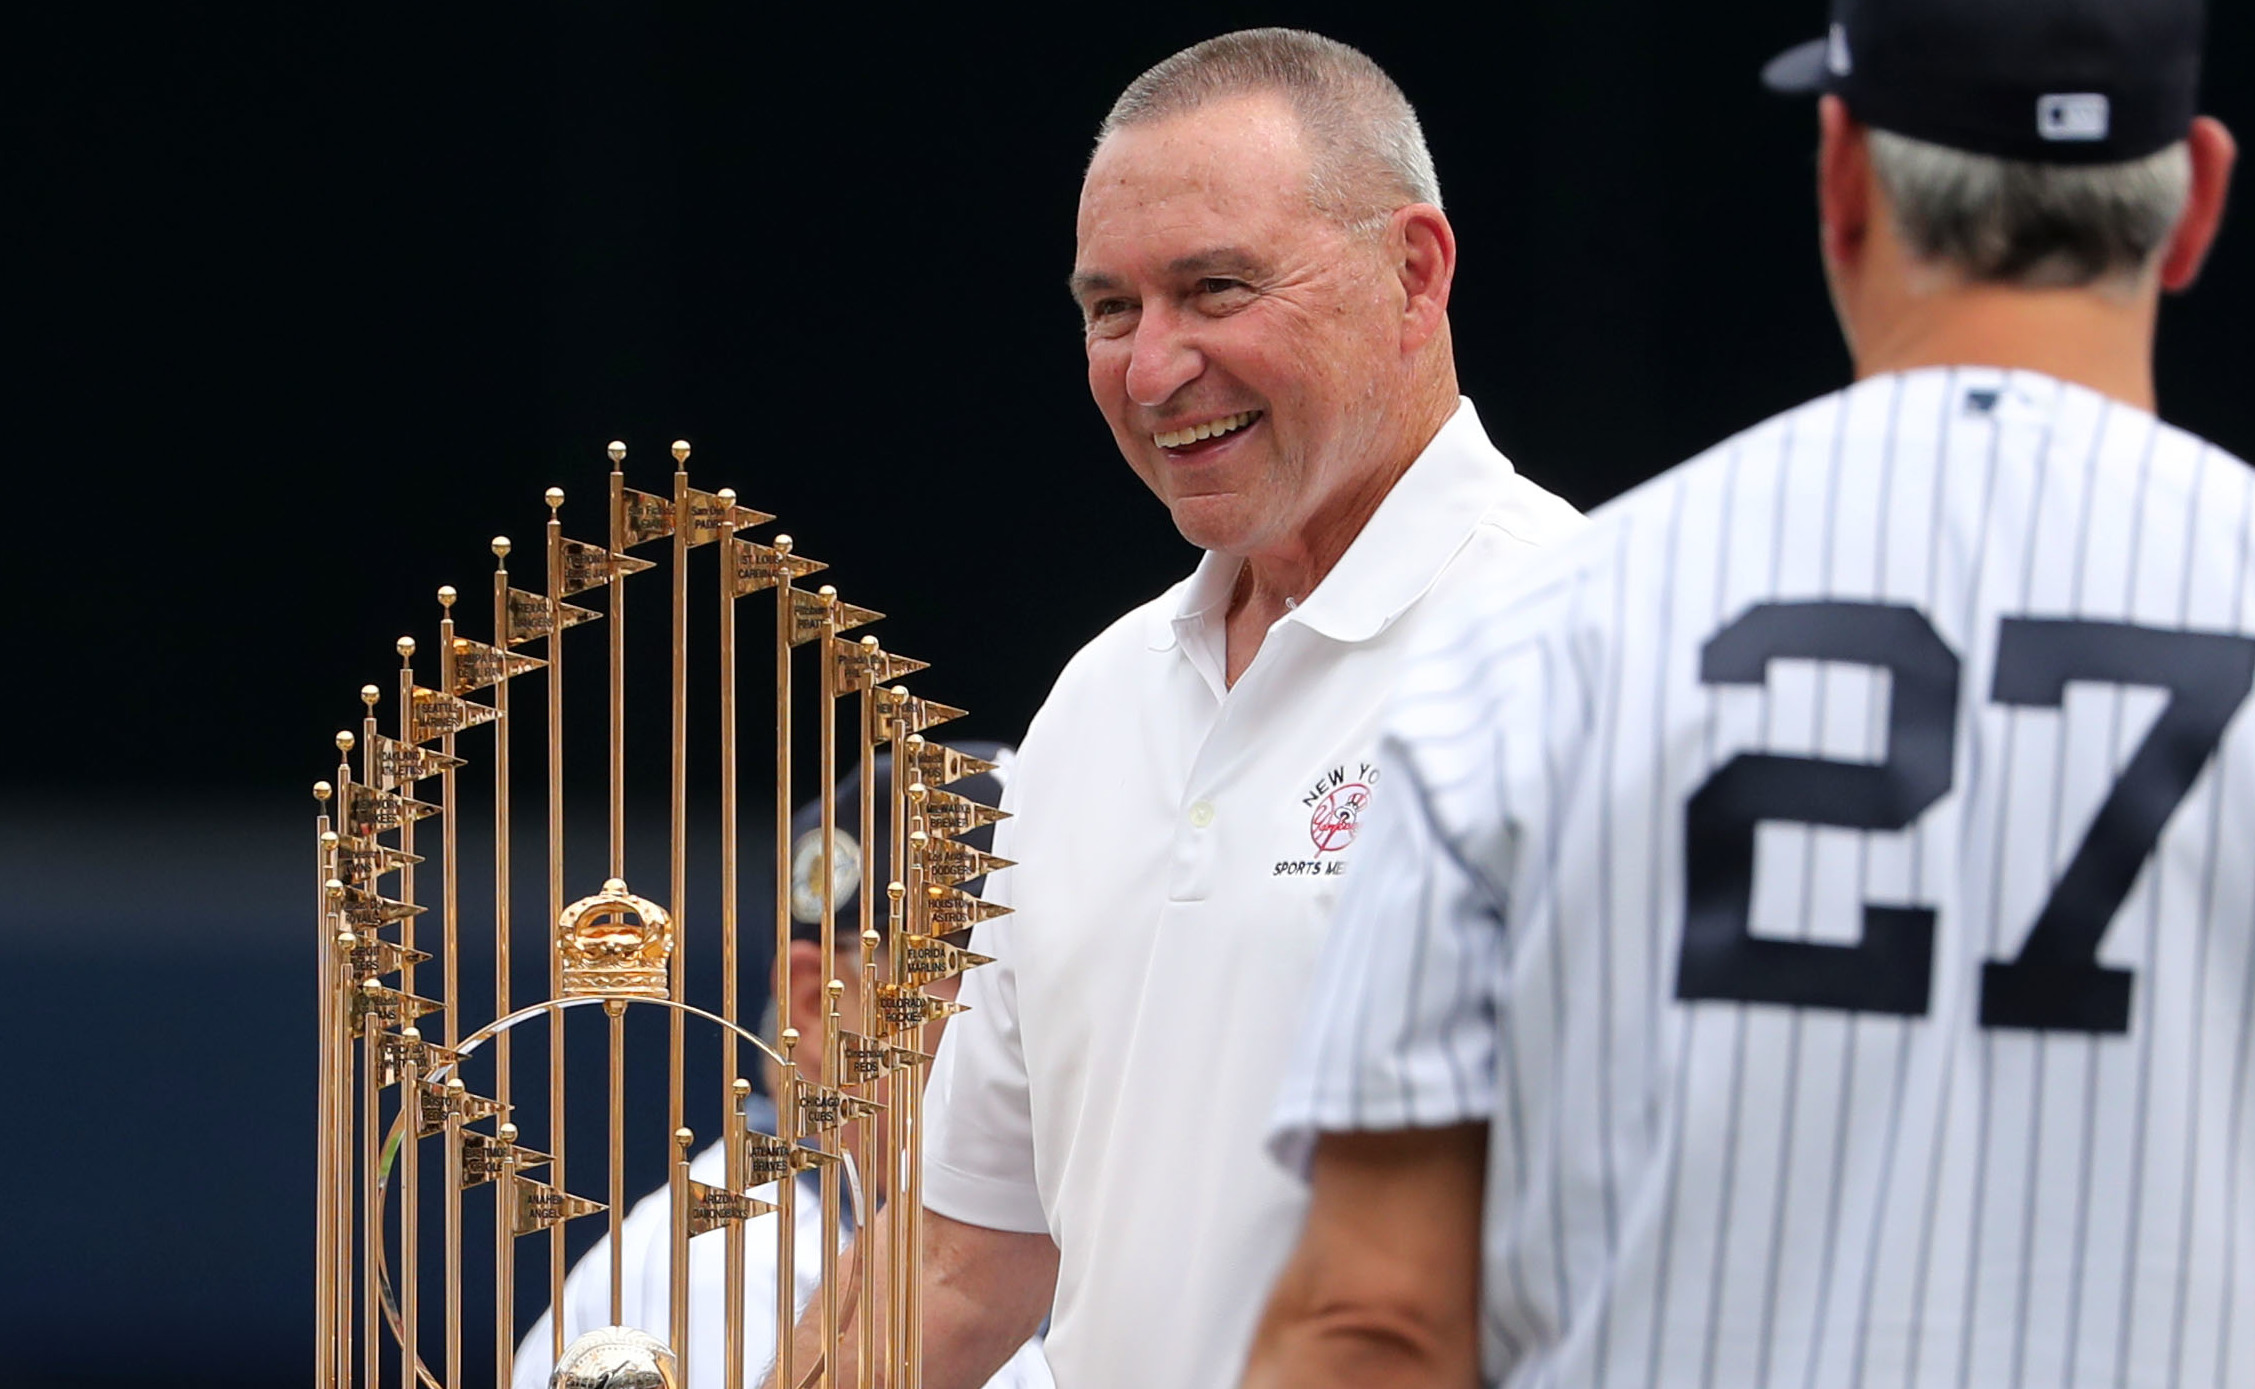 Yankees back in the old routine with 27th World Series title